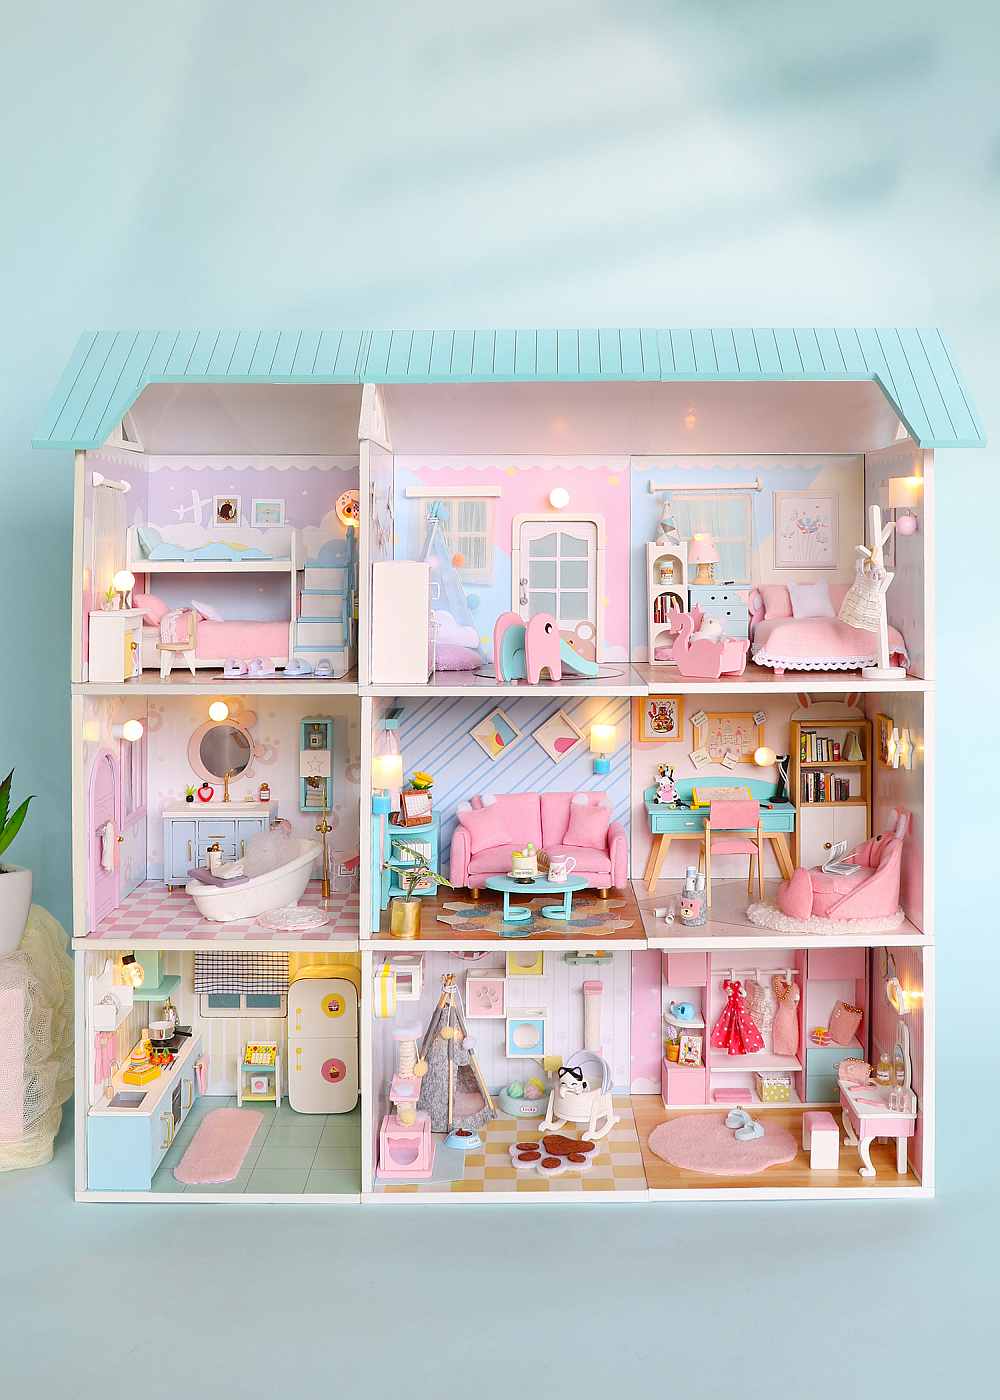 Hoomeda DIY  Nine-in-One Combined Wooden Miniature Dollhouse w/ LEDs and Roofs Birthday Gift